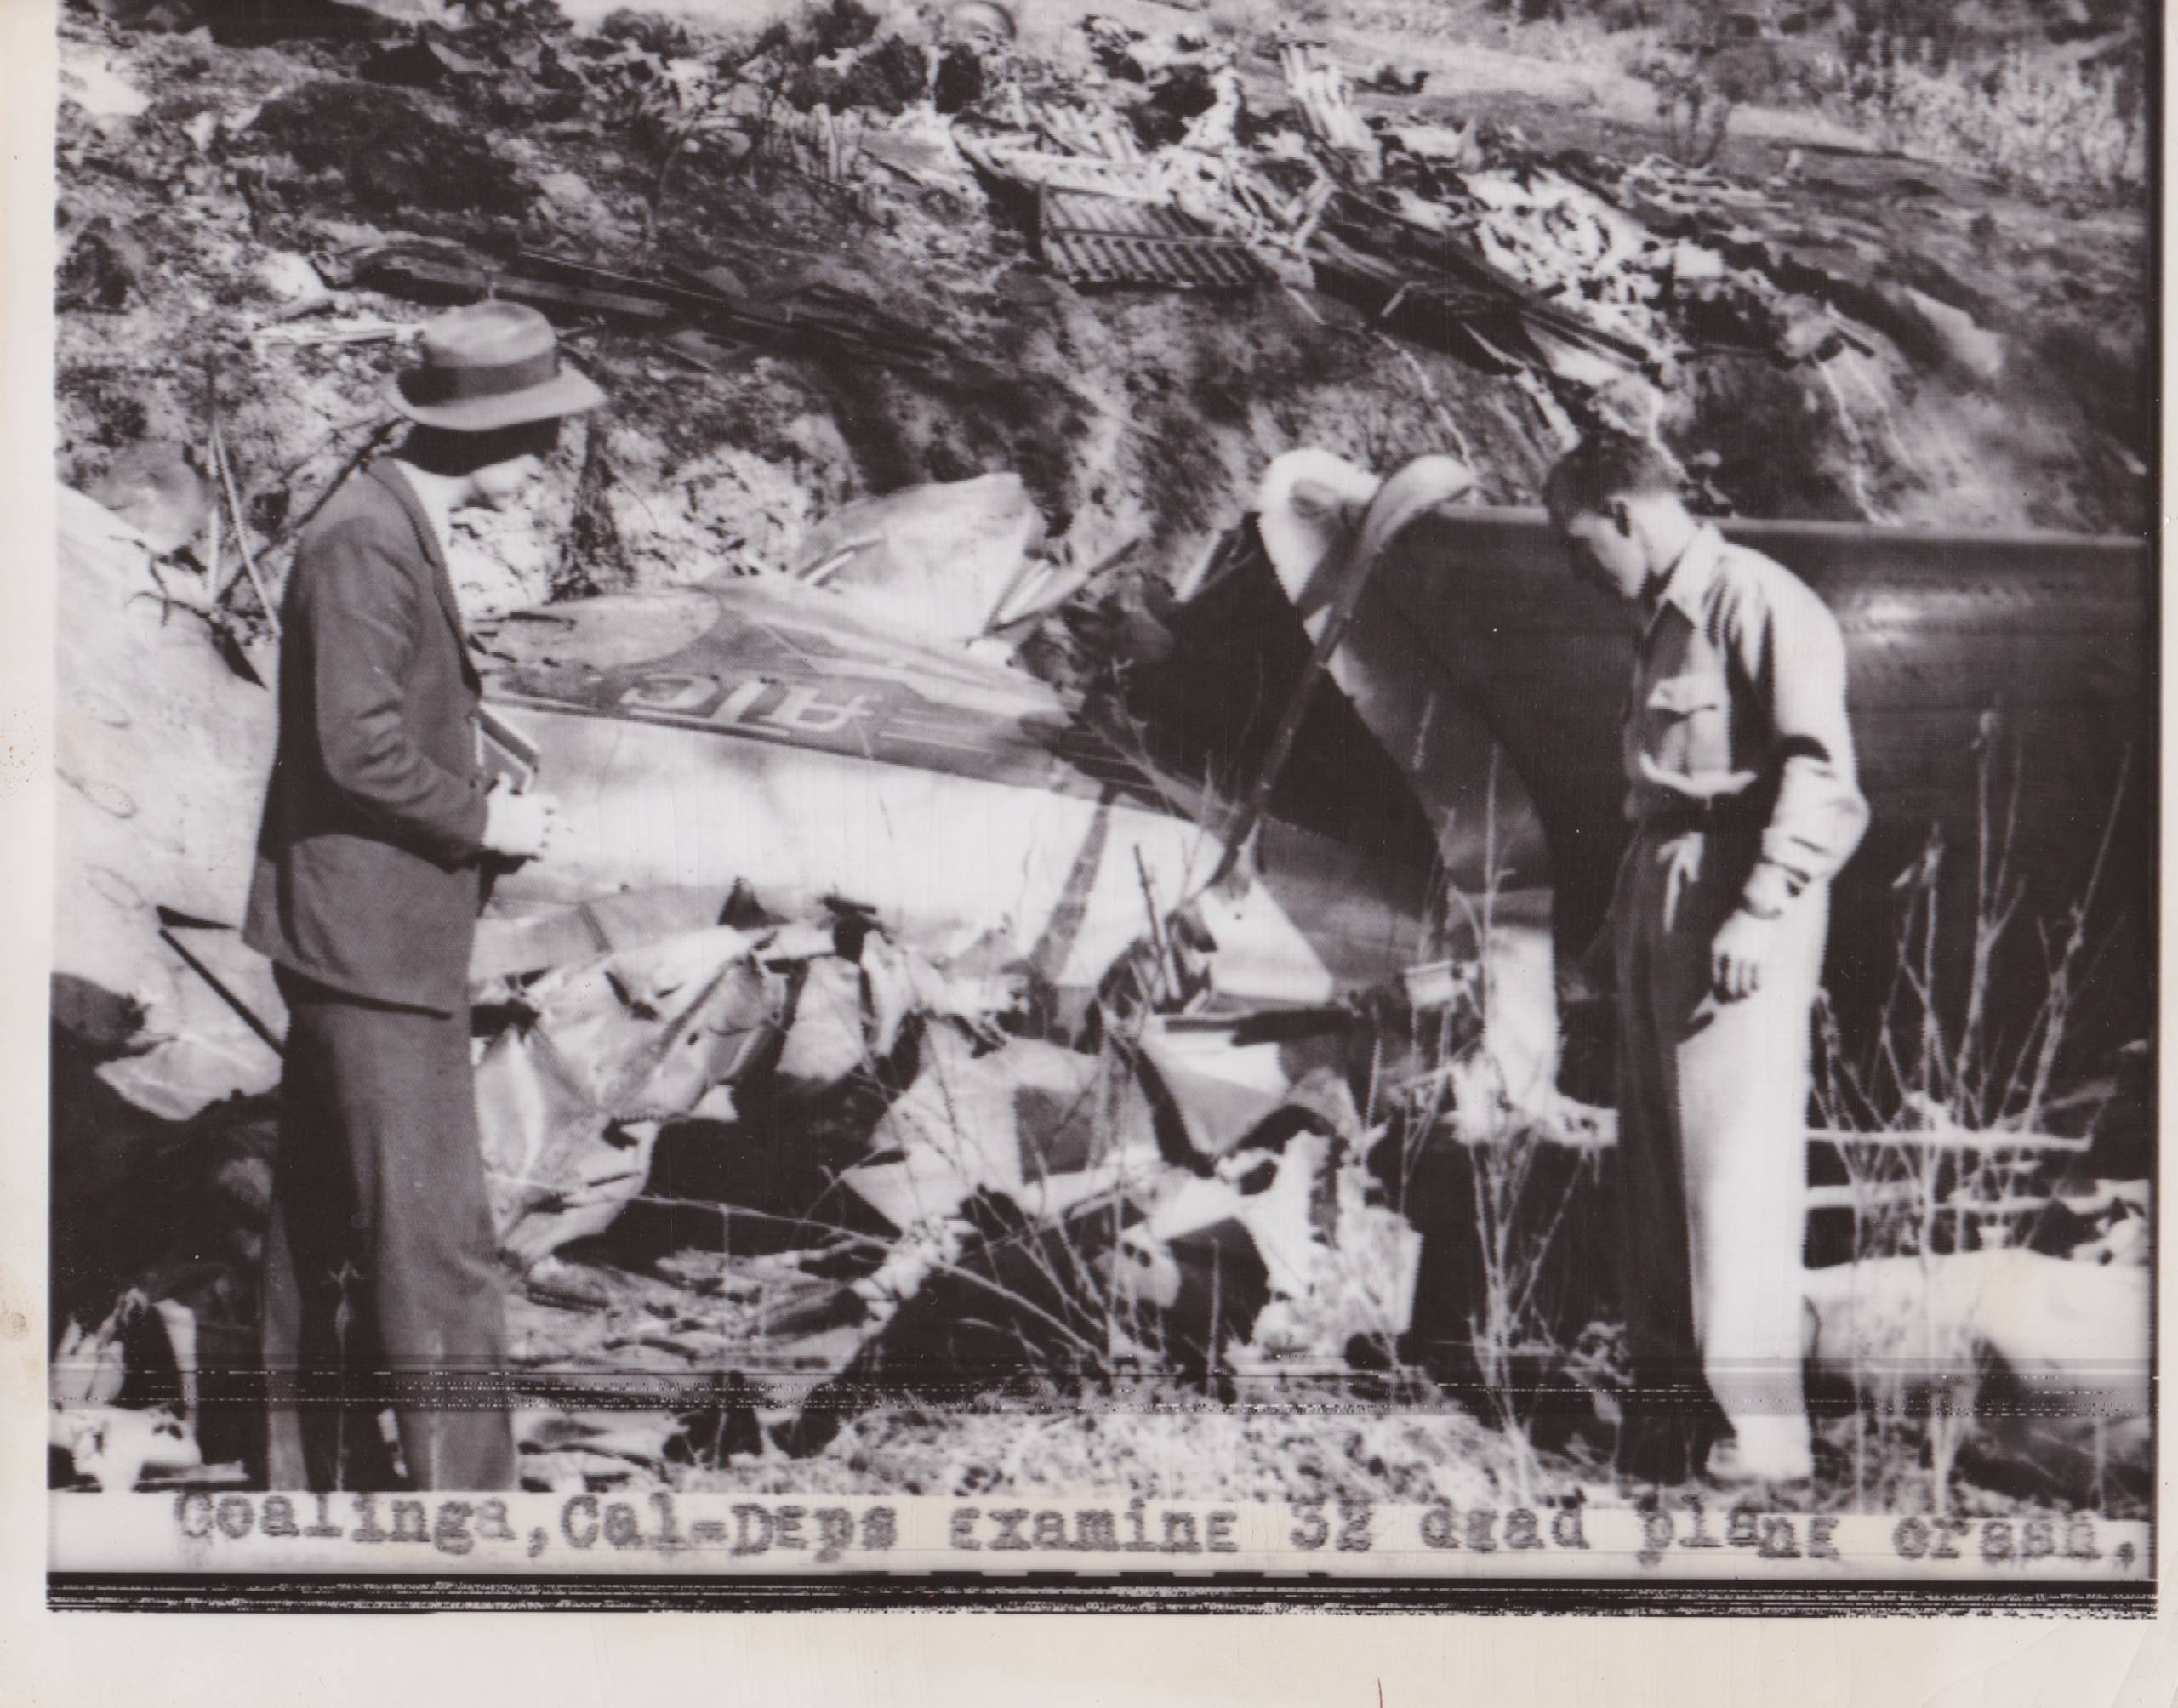 Two men stand in front of a plane wreckage site.